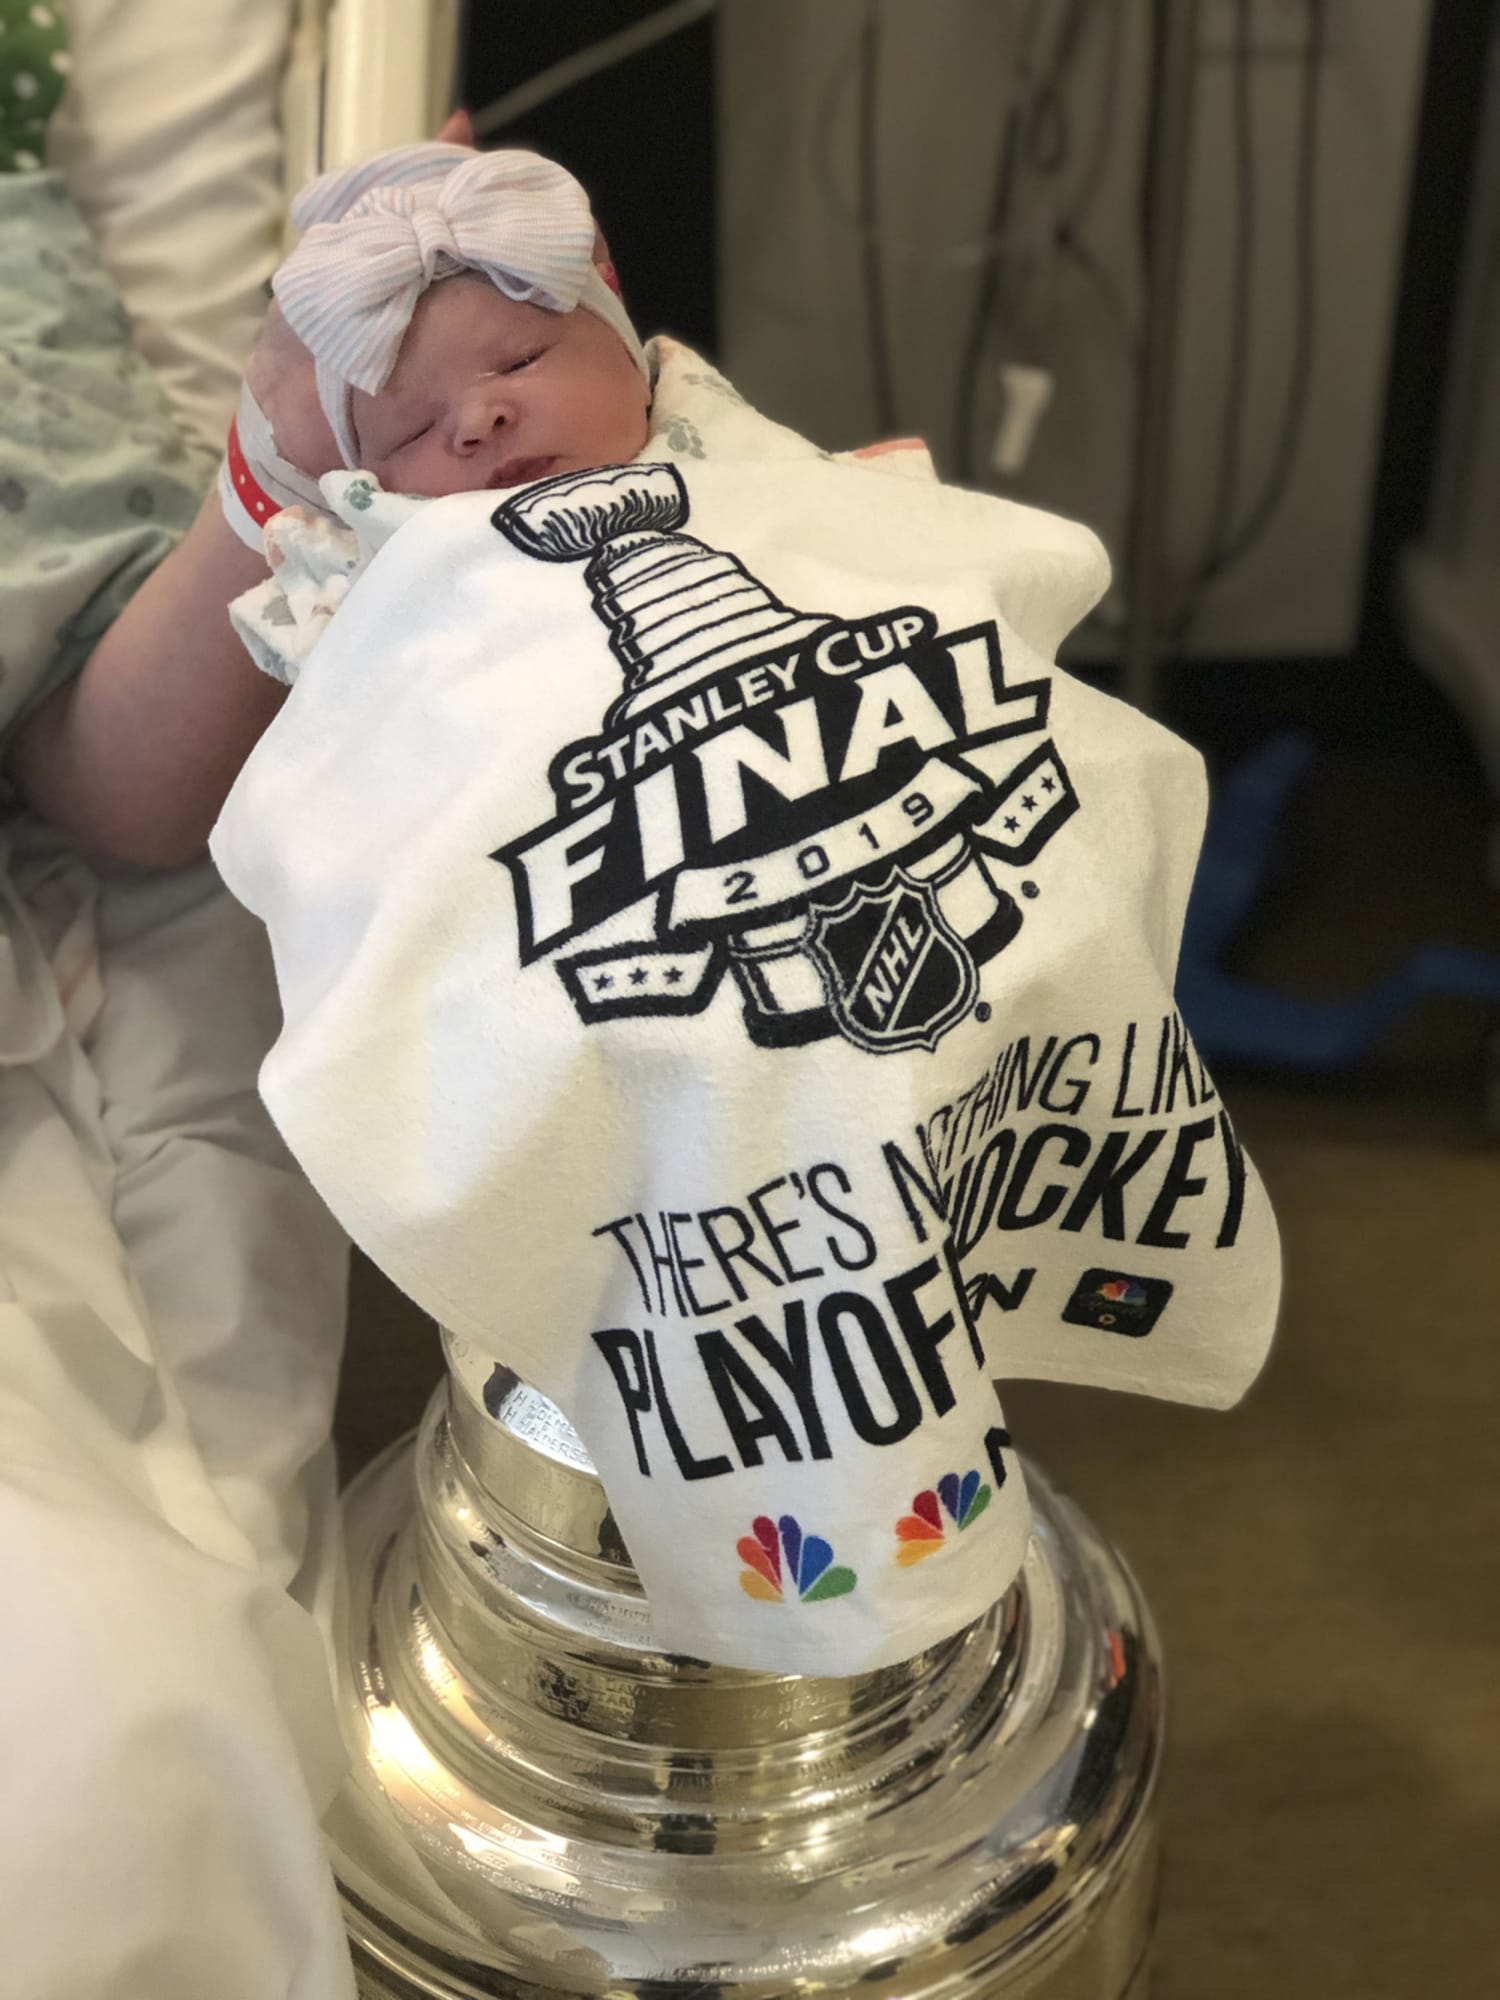 https://media-cldnry.s-nbcnews.com/image/upload/newscms/2019_23/1444677/youngest-baby-stanley-cup-trophy-today-inline-190605-004.jpg